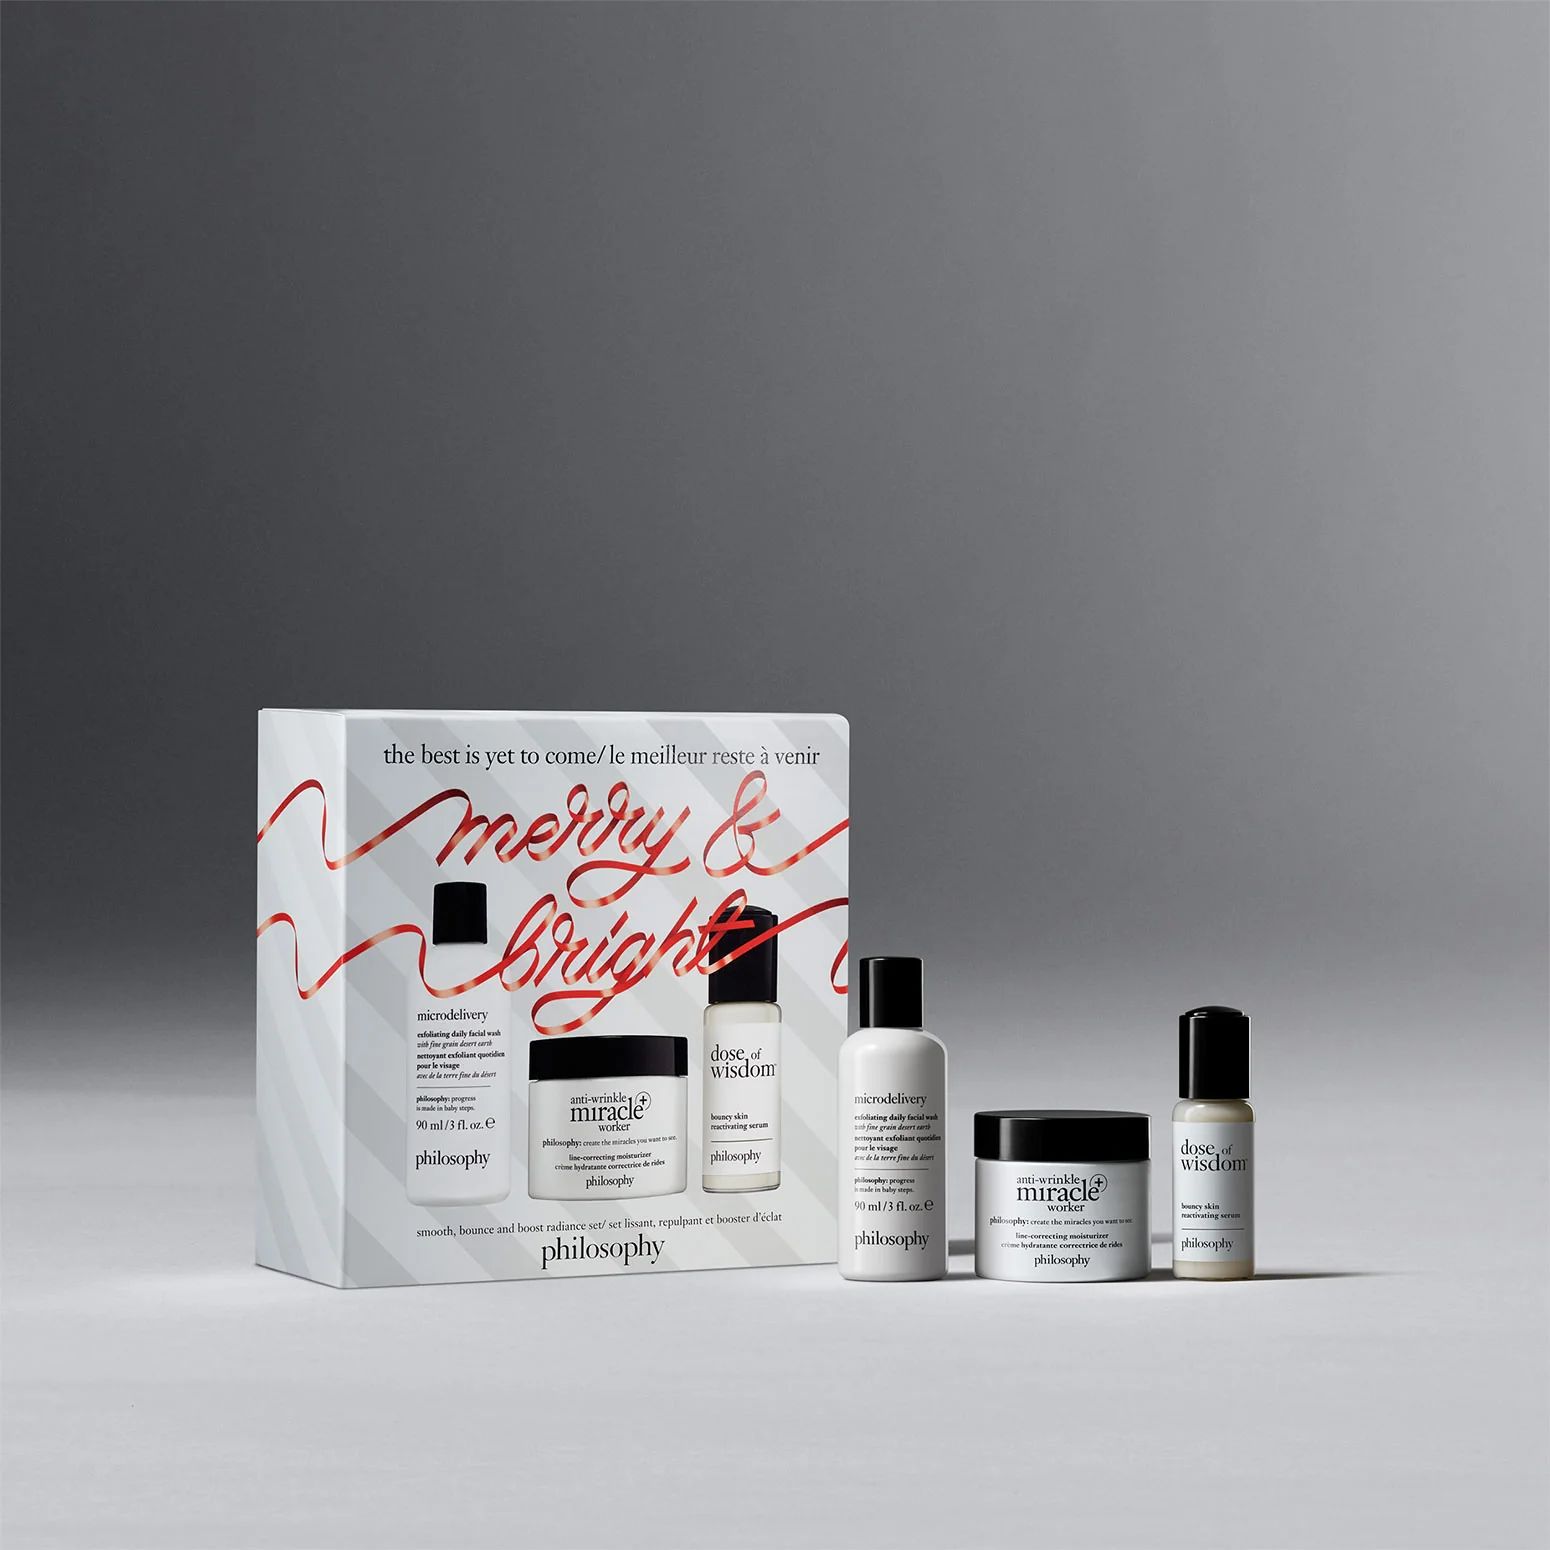 smooth, bounce & boost radiance gift set | Philosophy